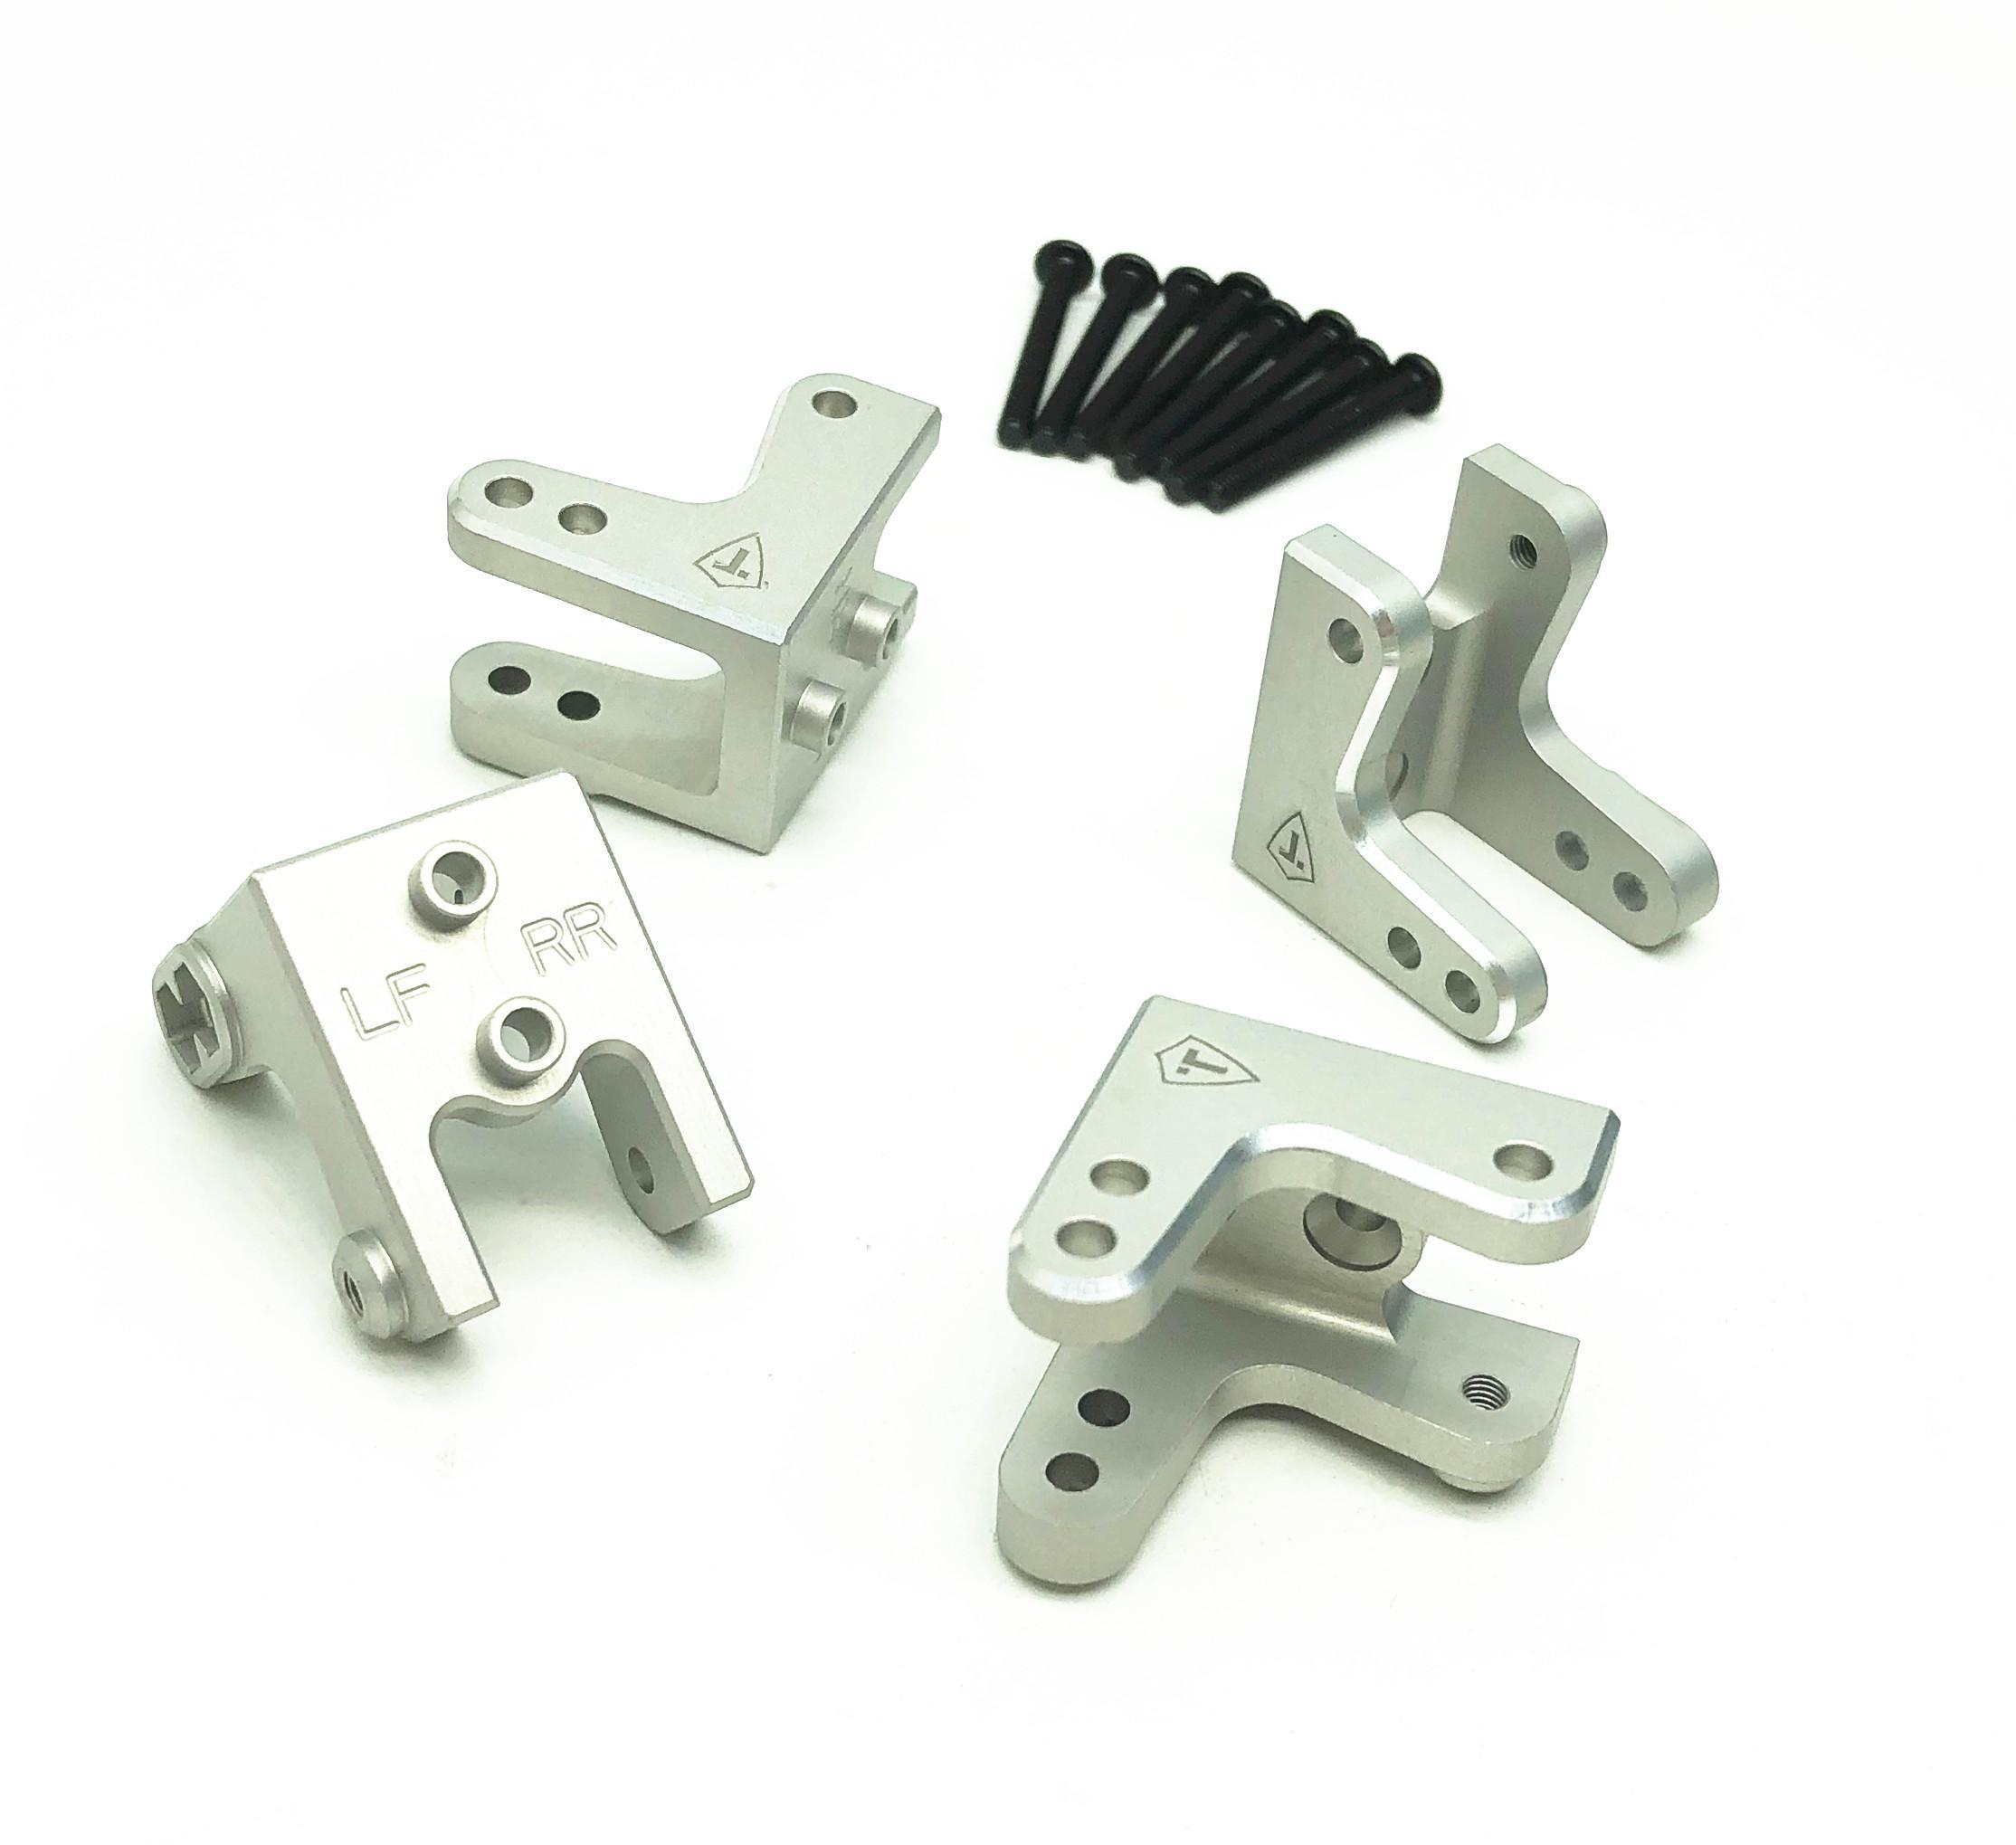 Treal Aluminum 7075 Shock Mount Set (4) for Losi LMT (Silver) ...